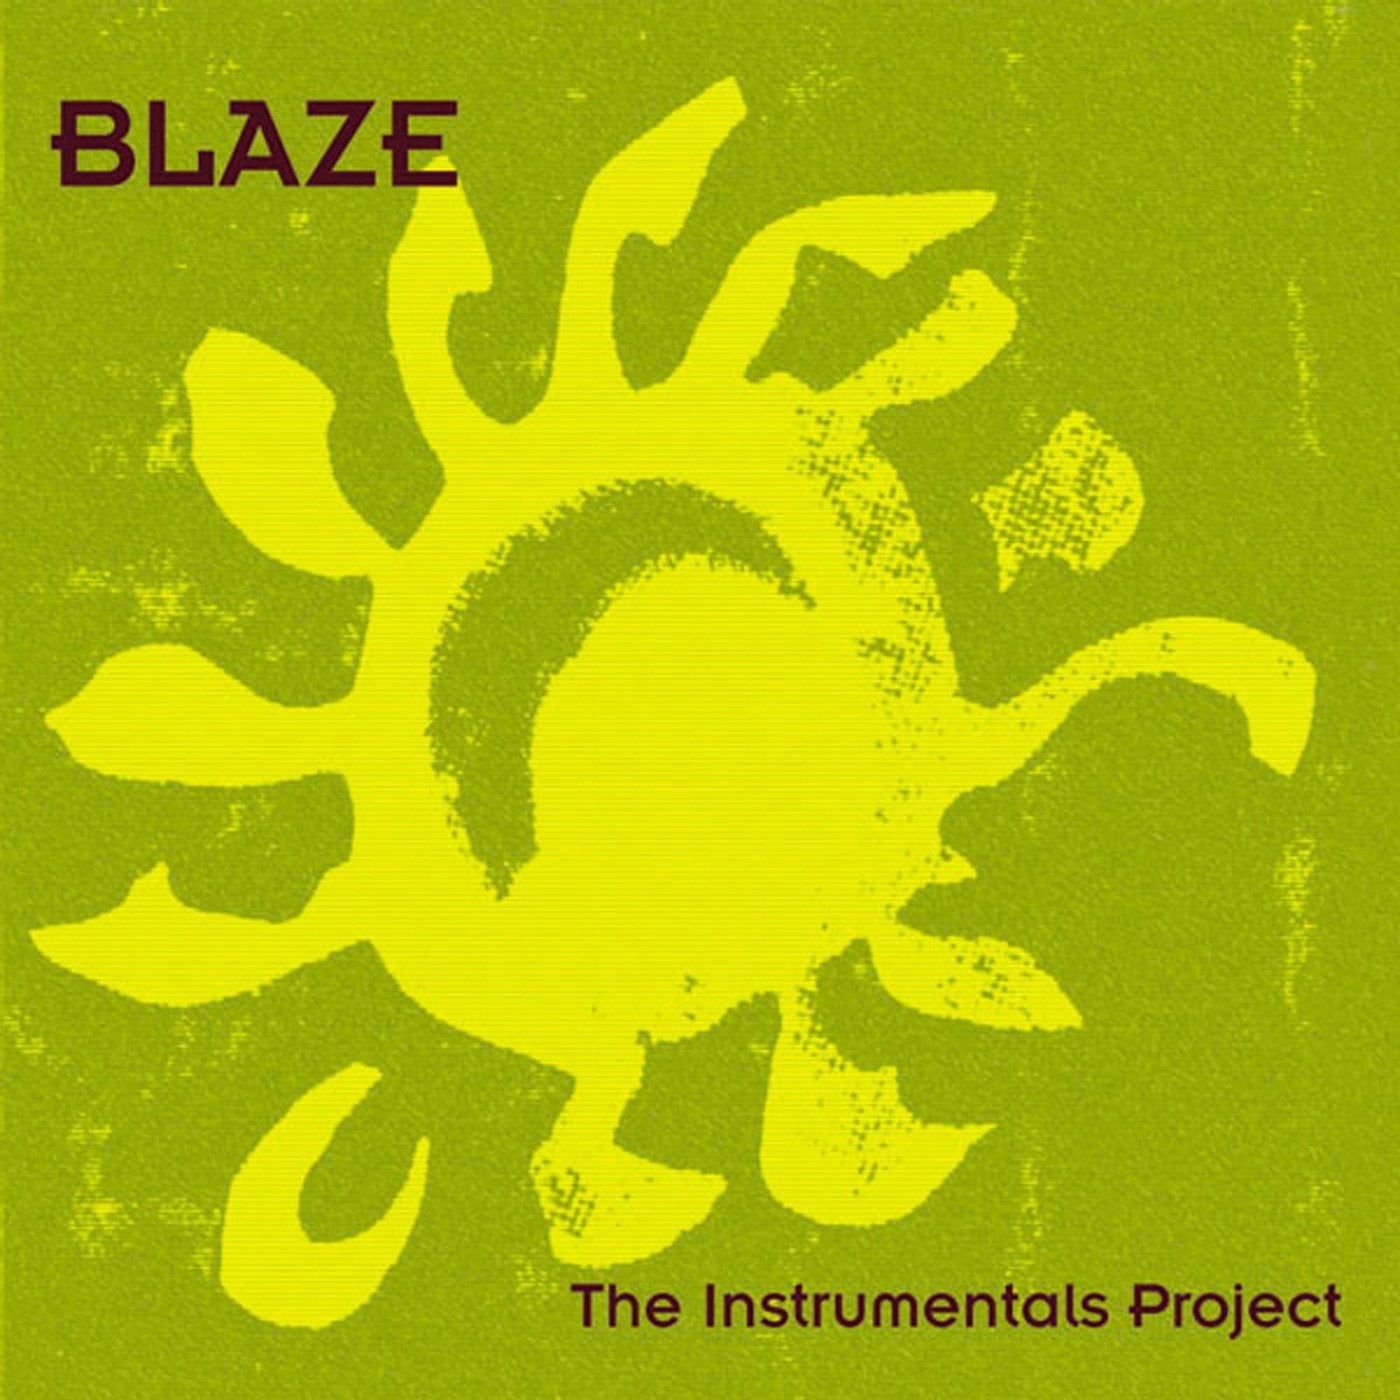 The Instrumentals Project